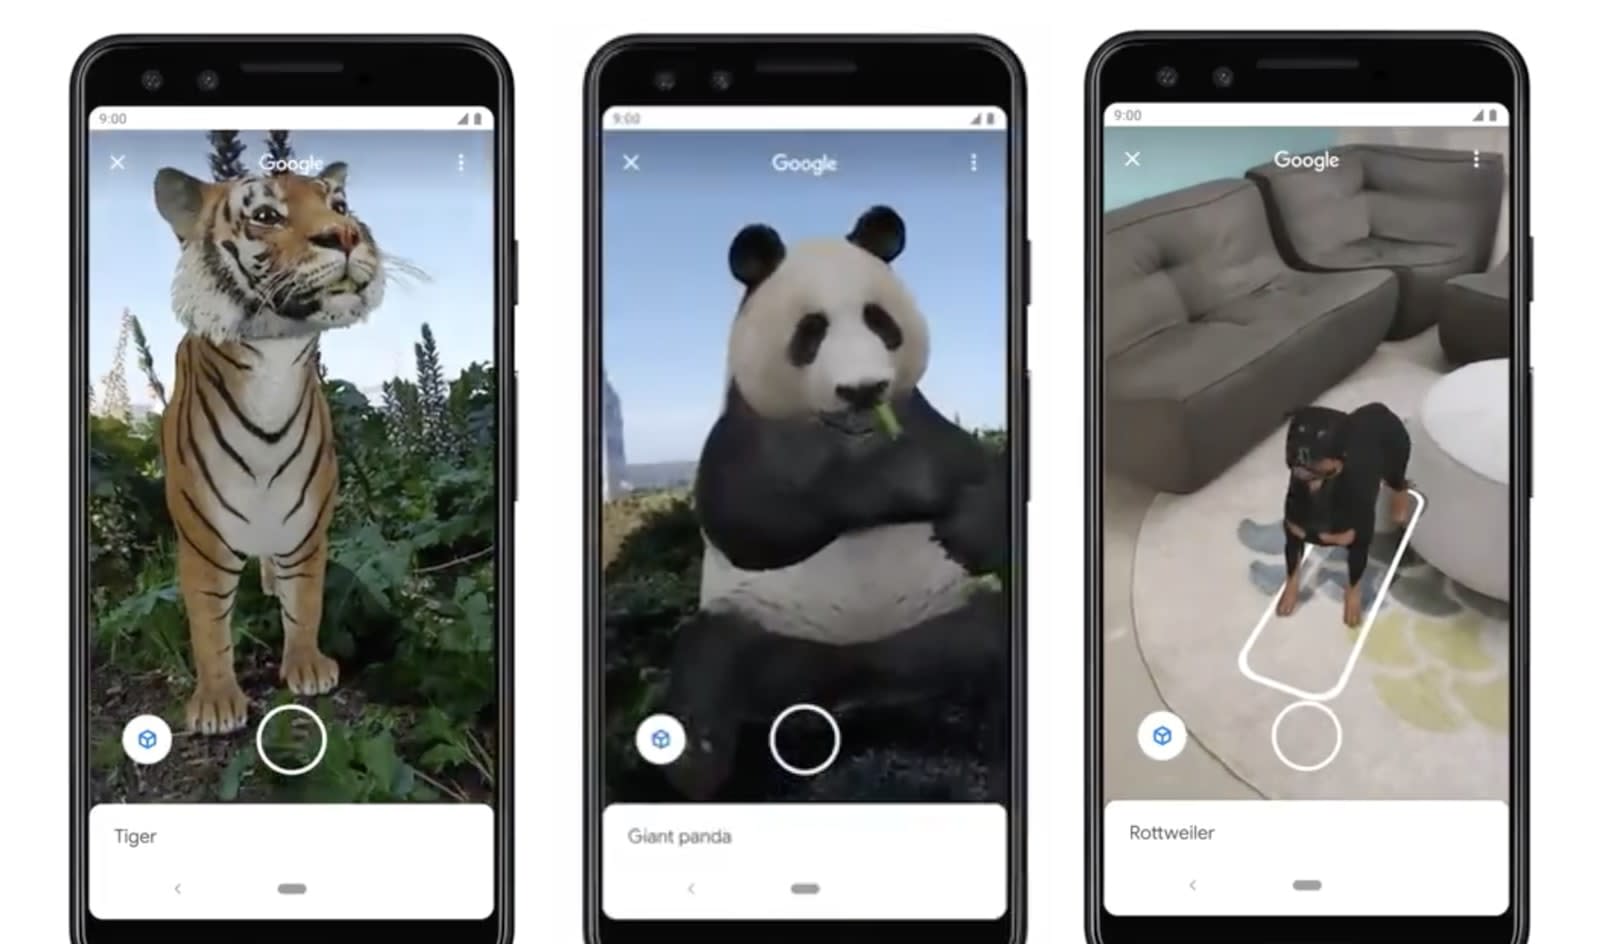 Google puts augmented reality animals in its Search app | Engadget